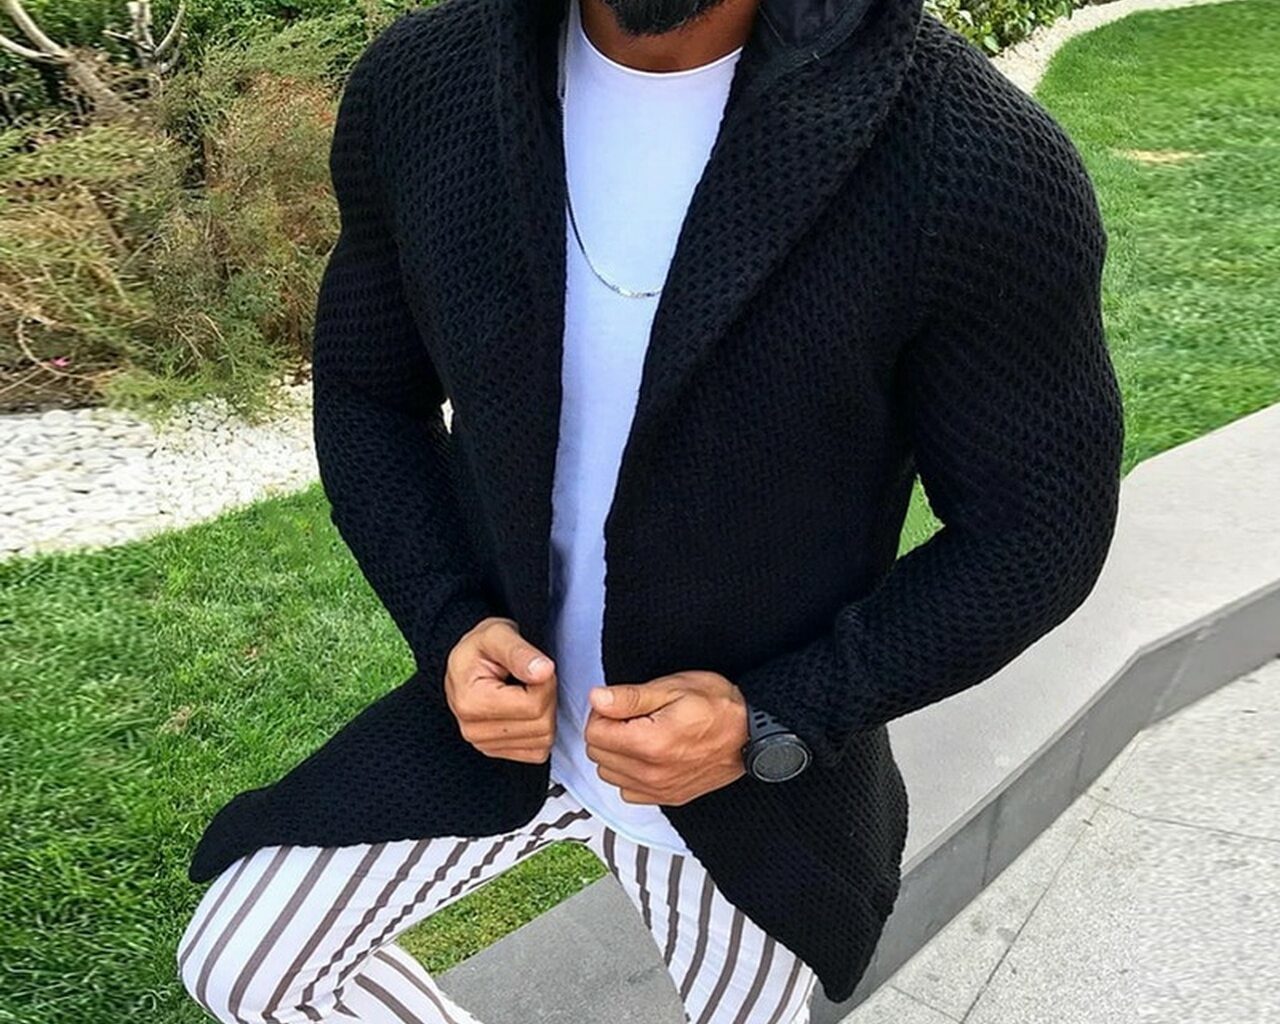 Mens Long Black Cardigan – The Streets | Fashion and Music